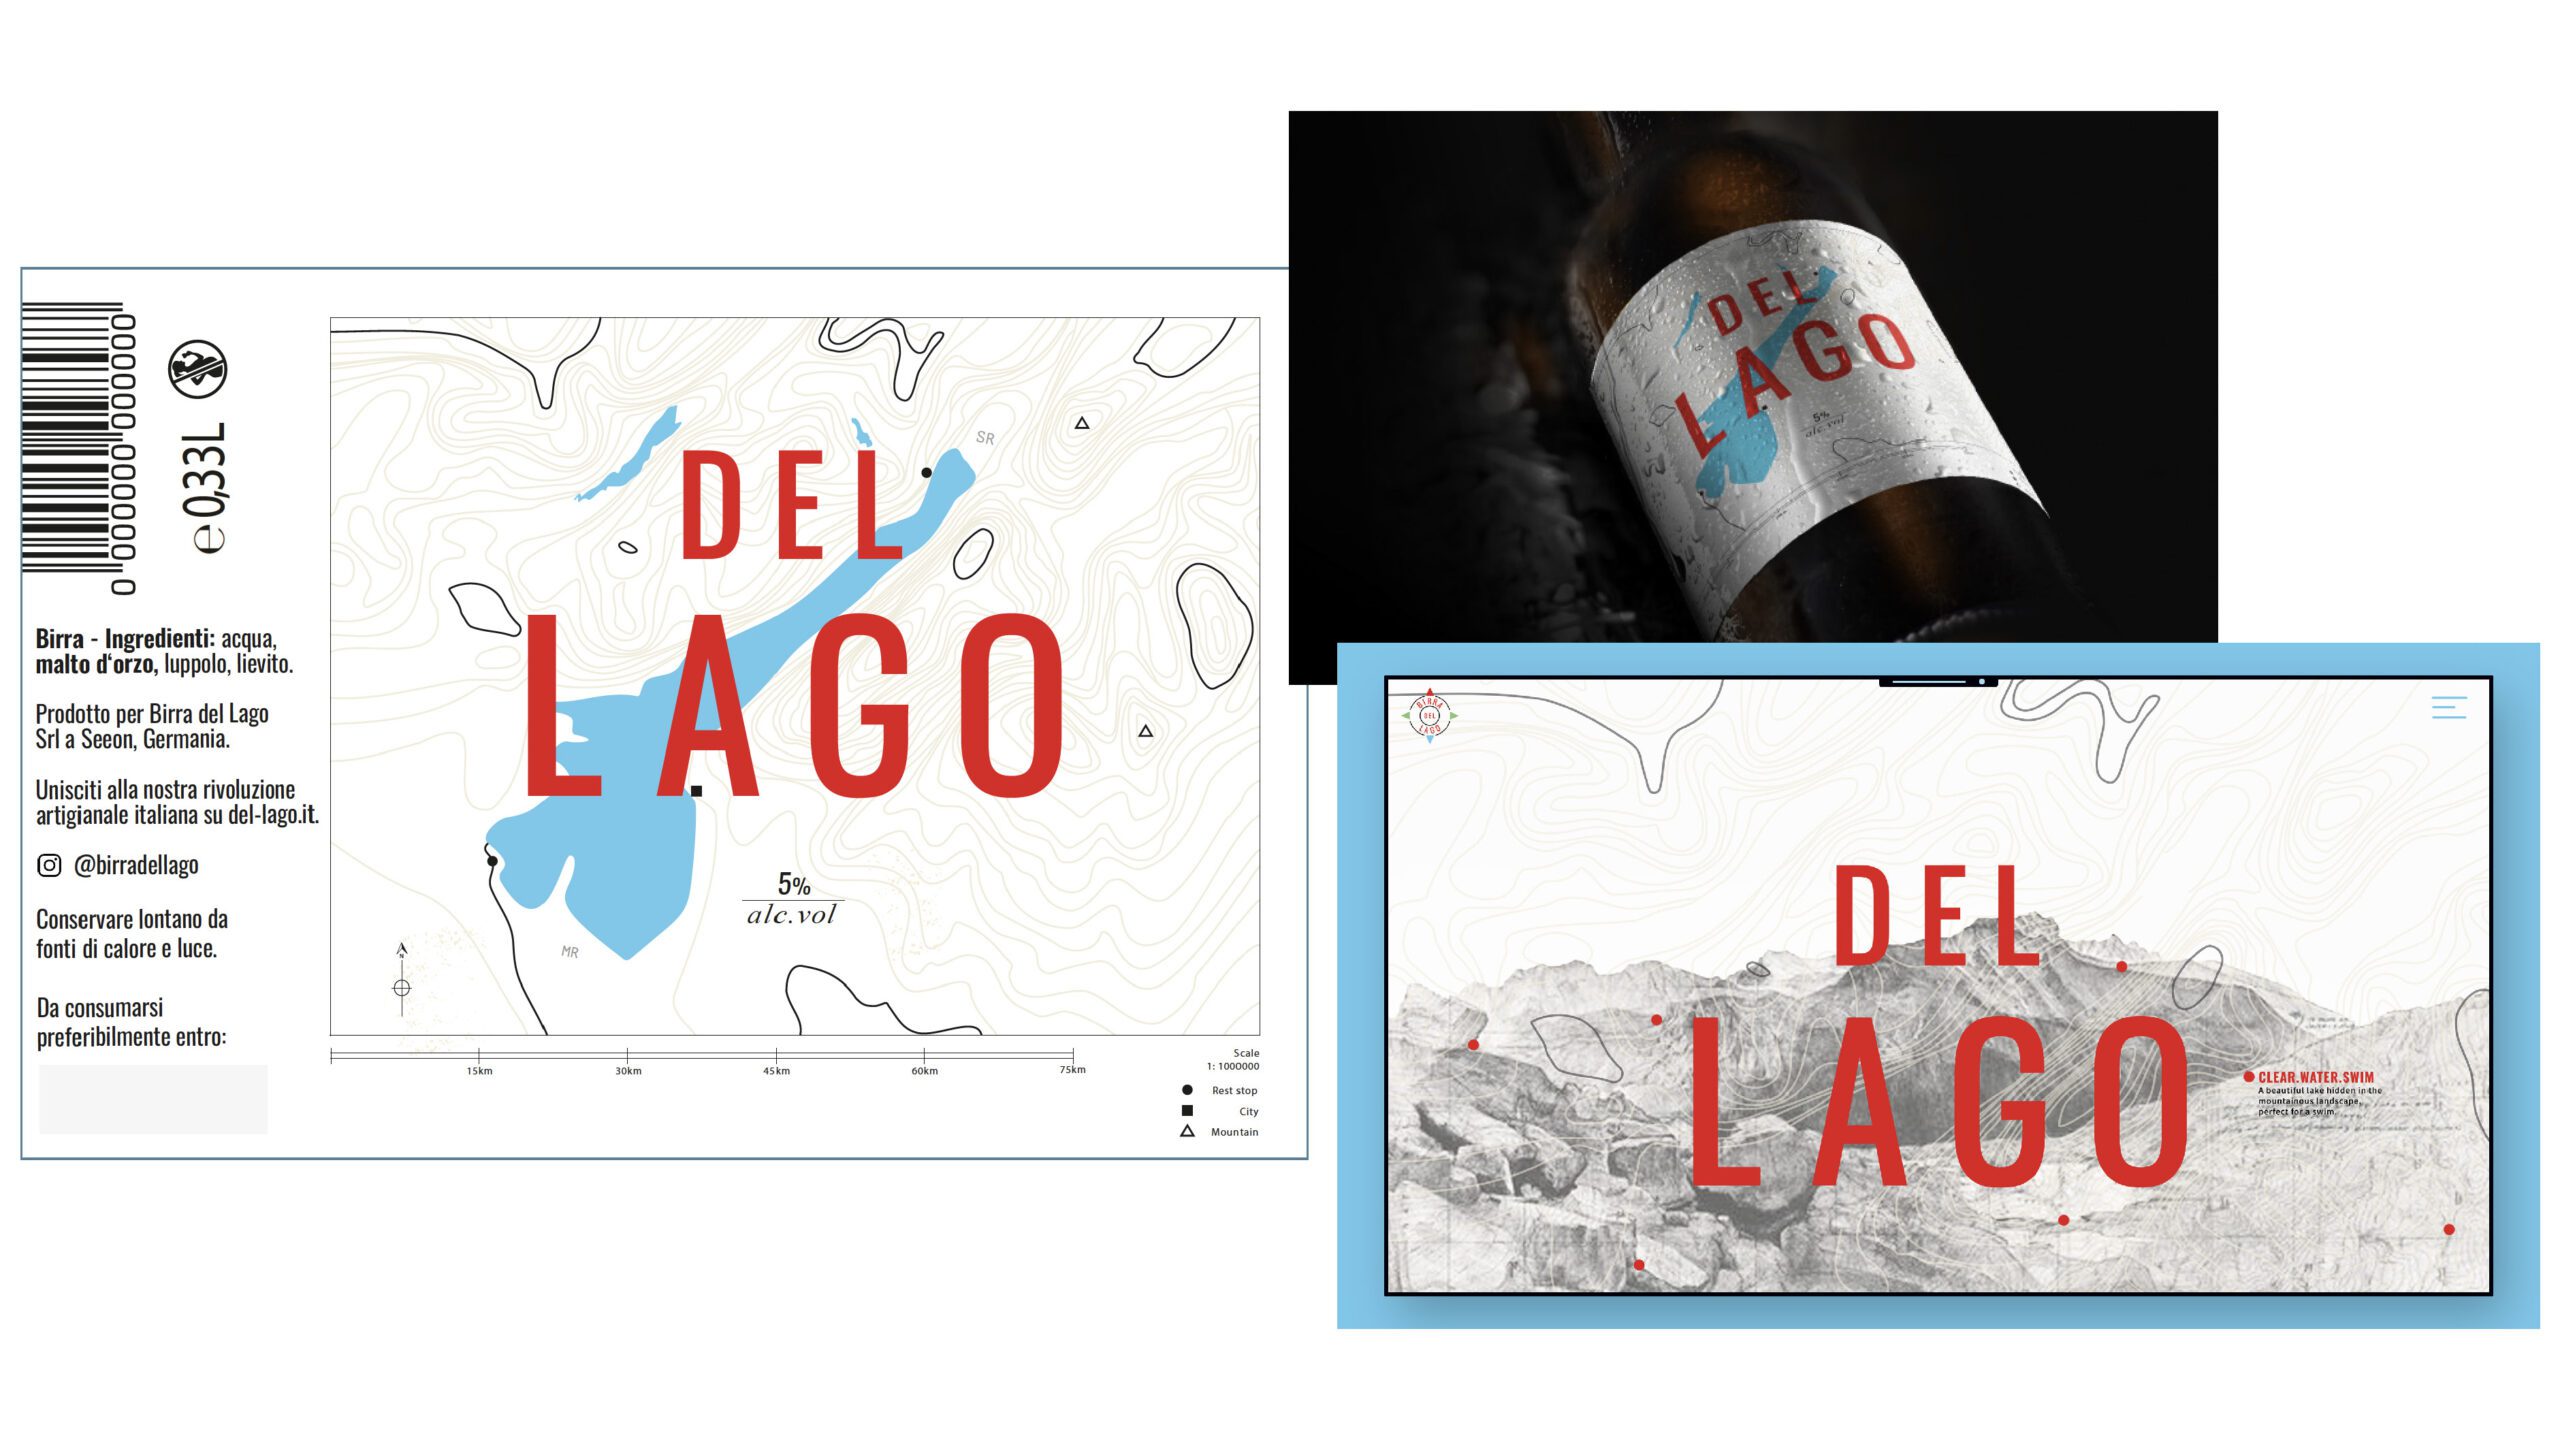 A beer label design saying Del Lago over a map of Lake garda, shown on and off a bottle and a website mockup that shows topography with mountain ranges with red dots.